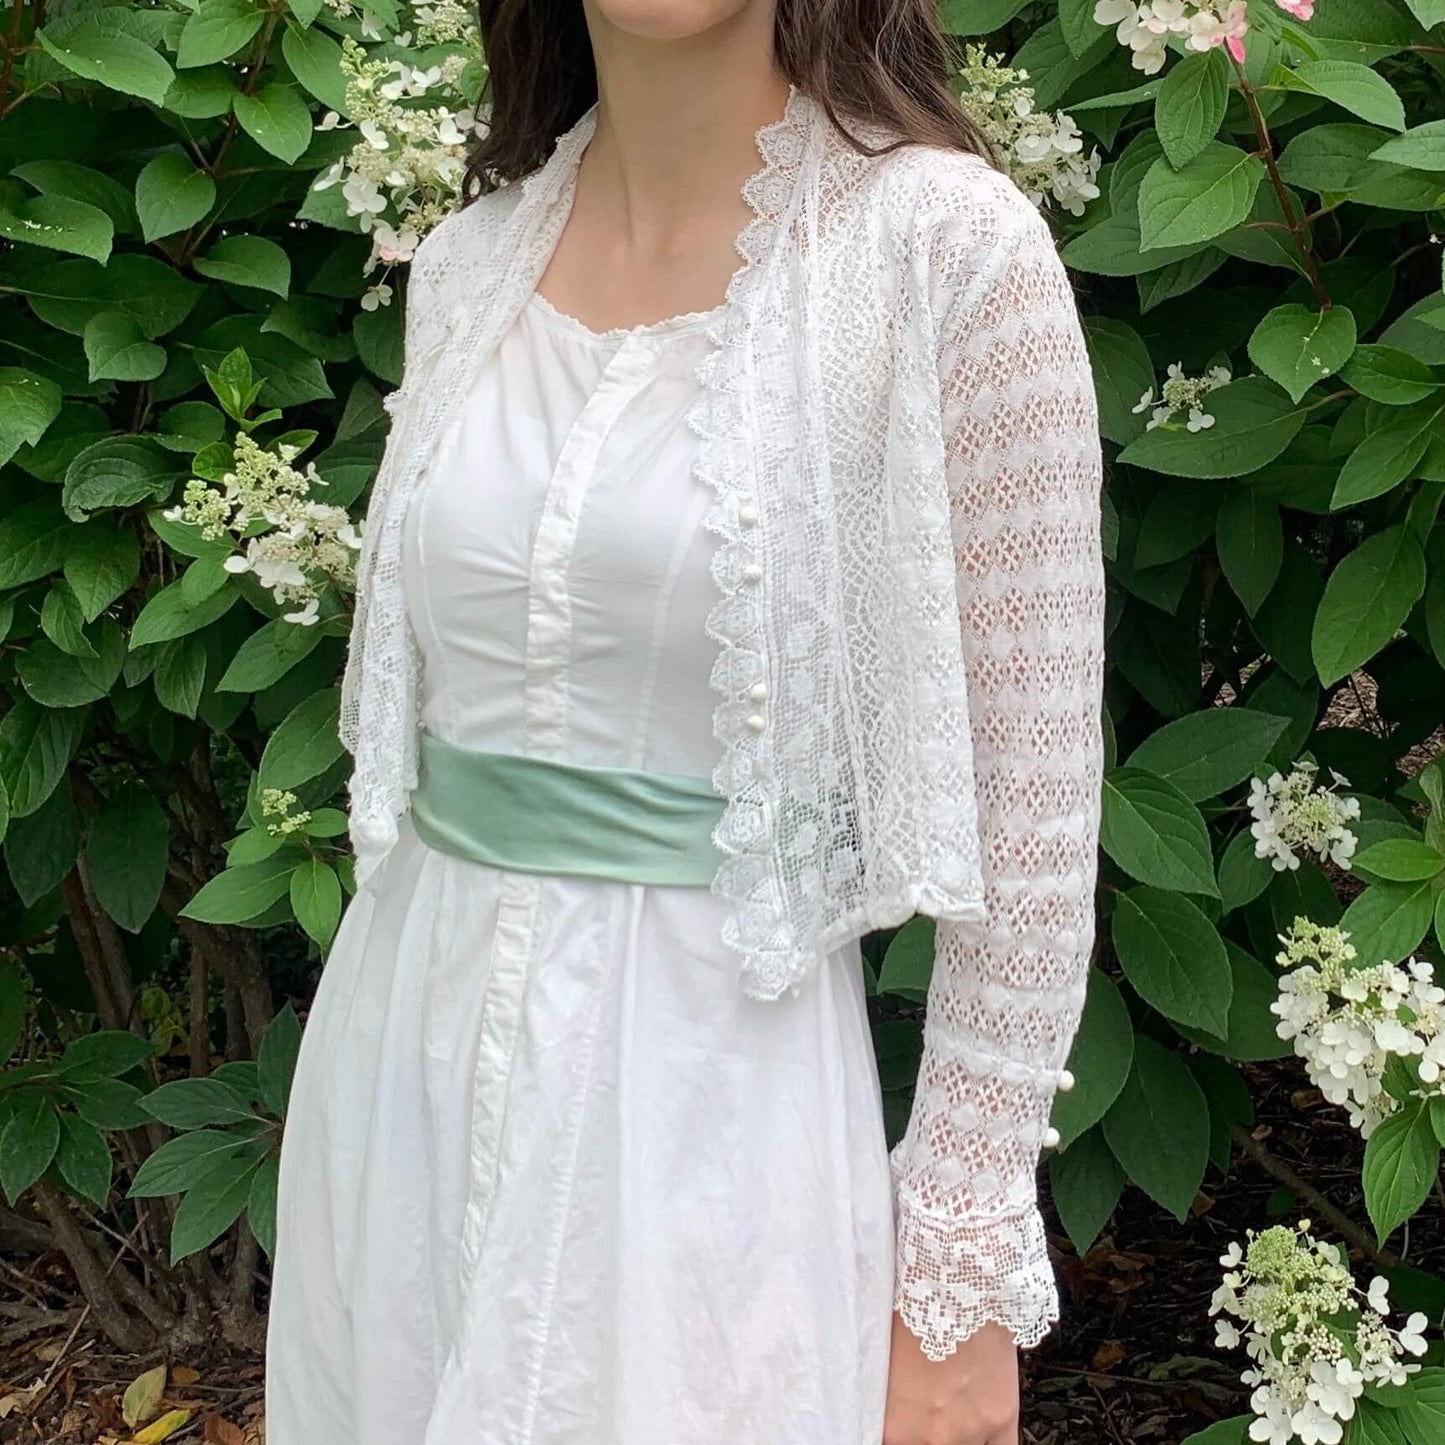 model wearing white dress and lace cardigan in front of flowers